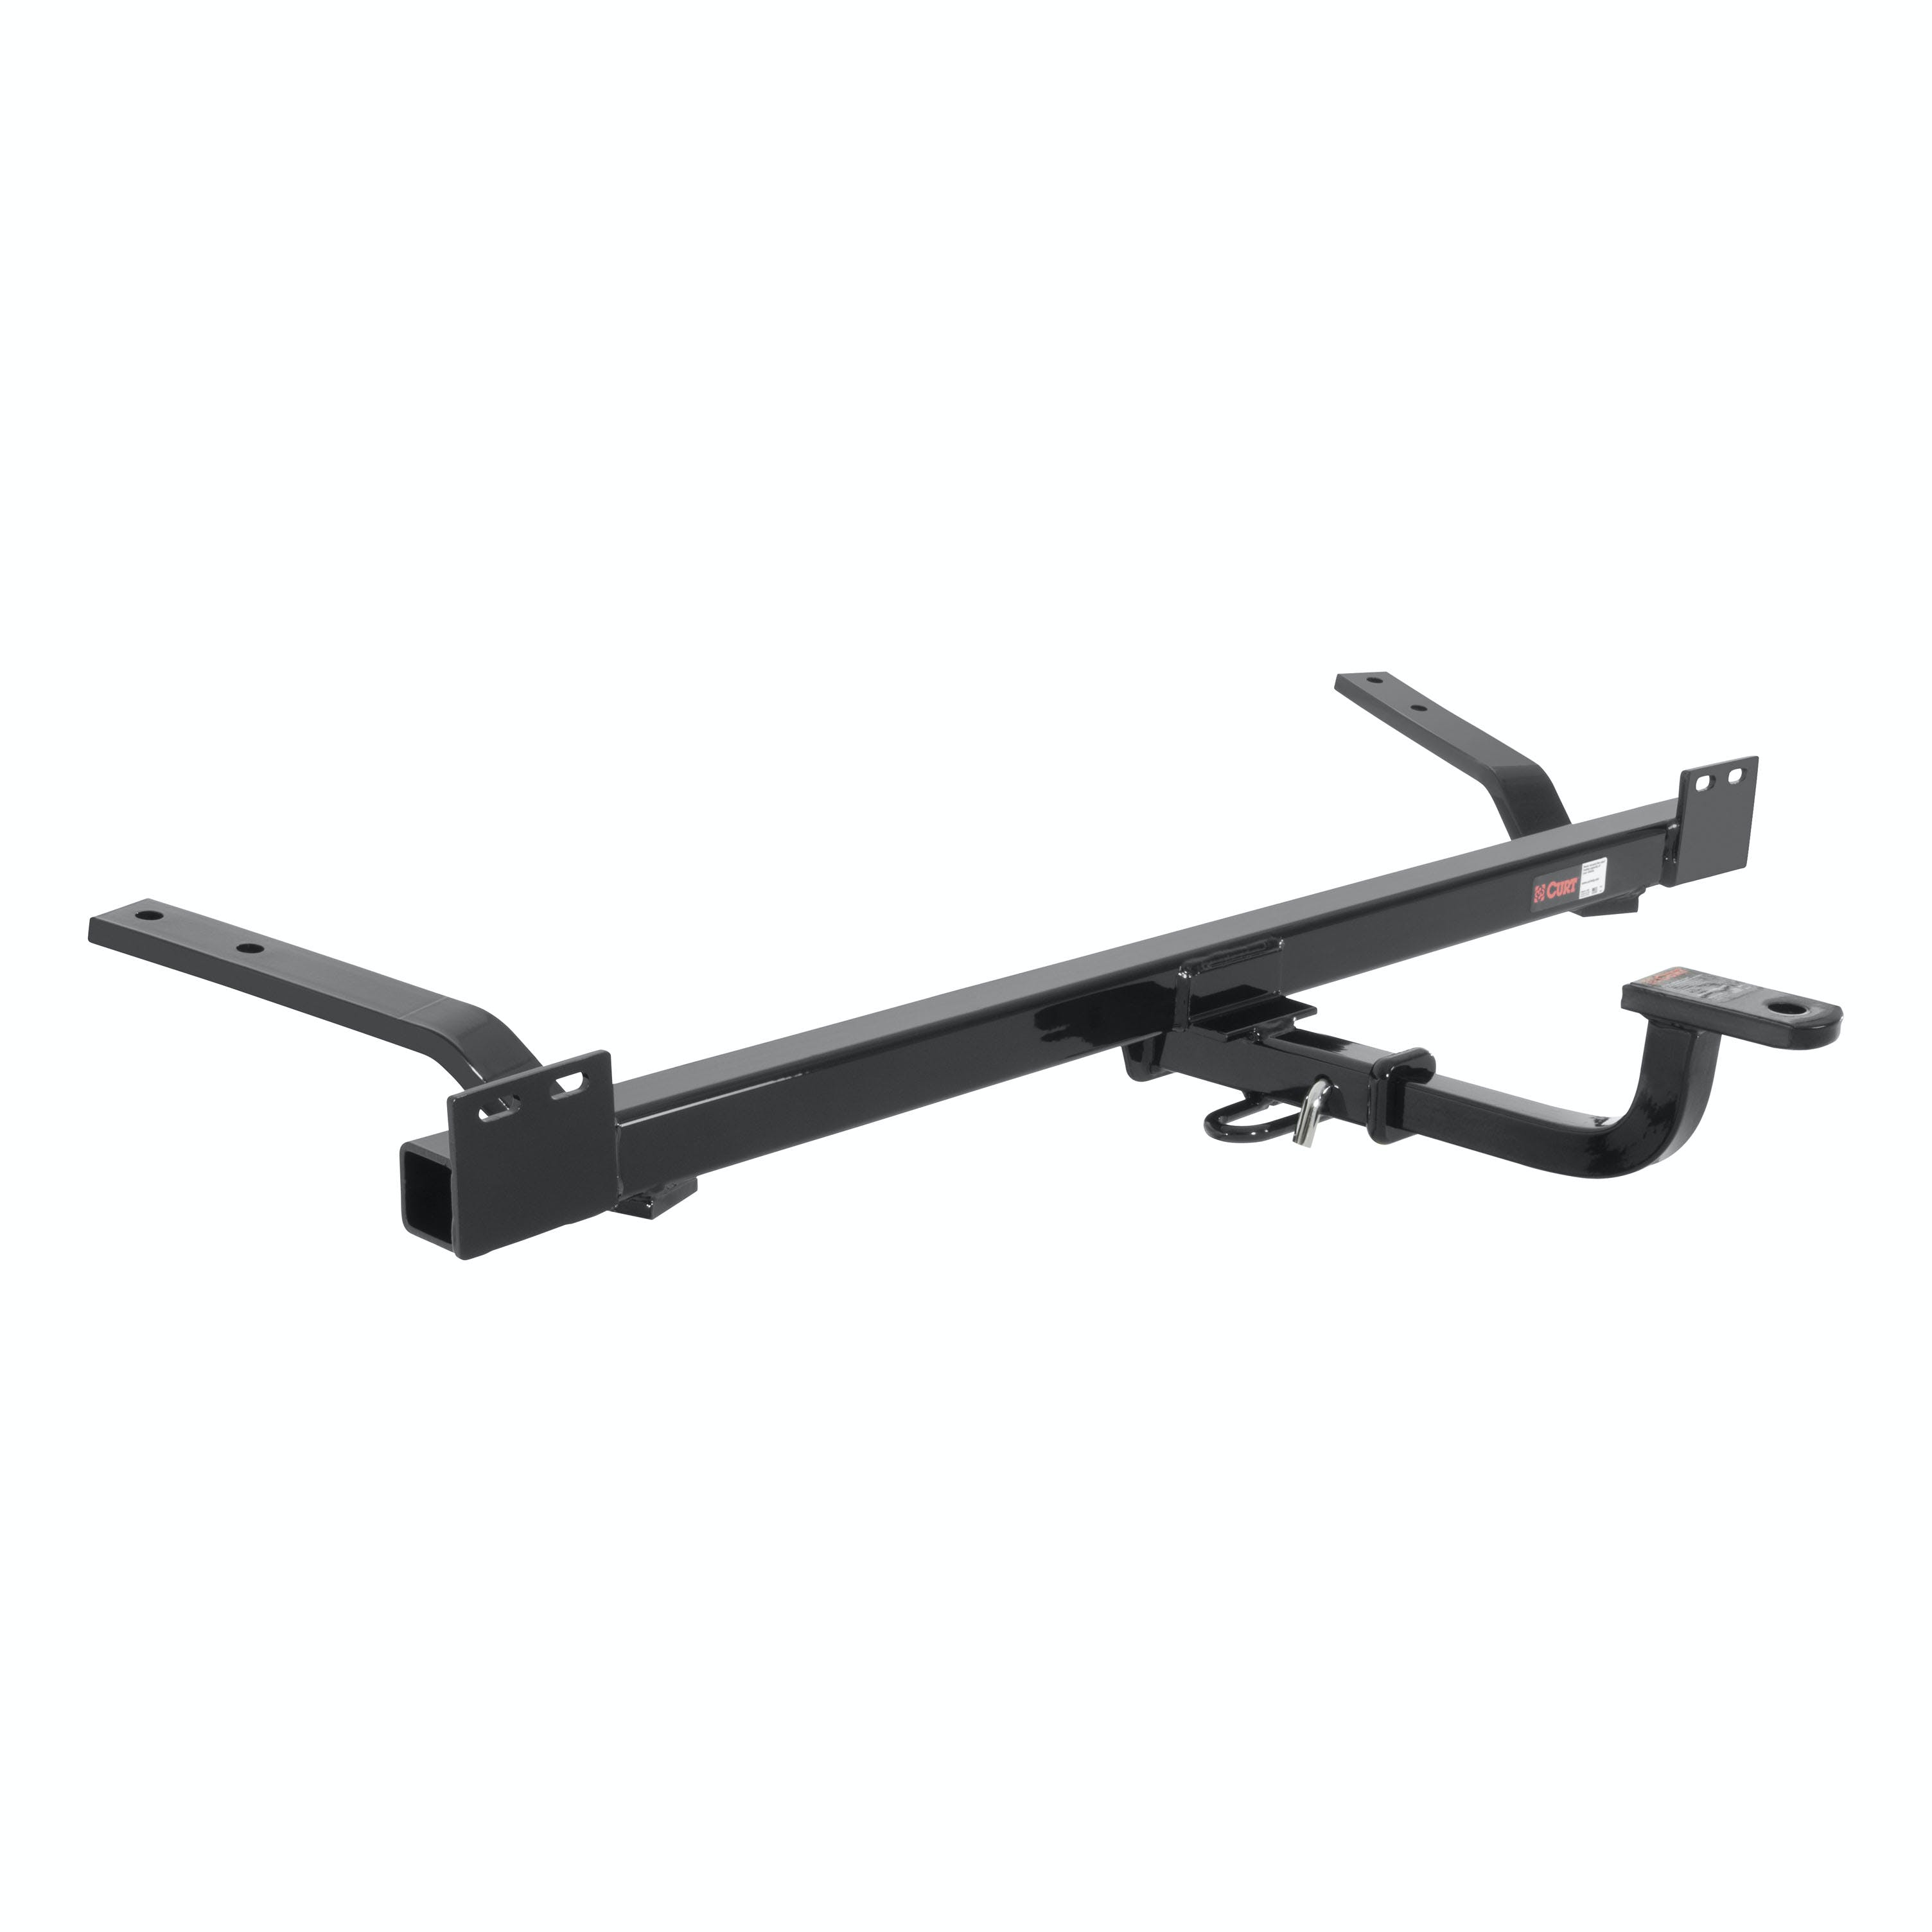 CURT 120413 Class 2 Hitch, 1-1/4 Mount, Select Buick, Chevy, Olds, Pontiac (Concealed)